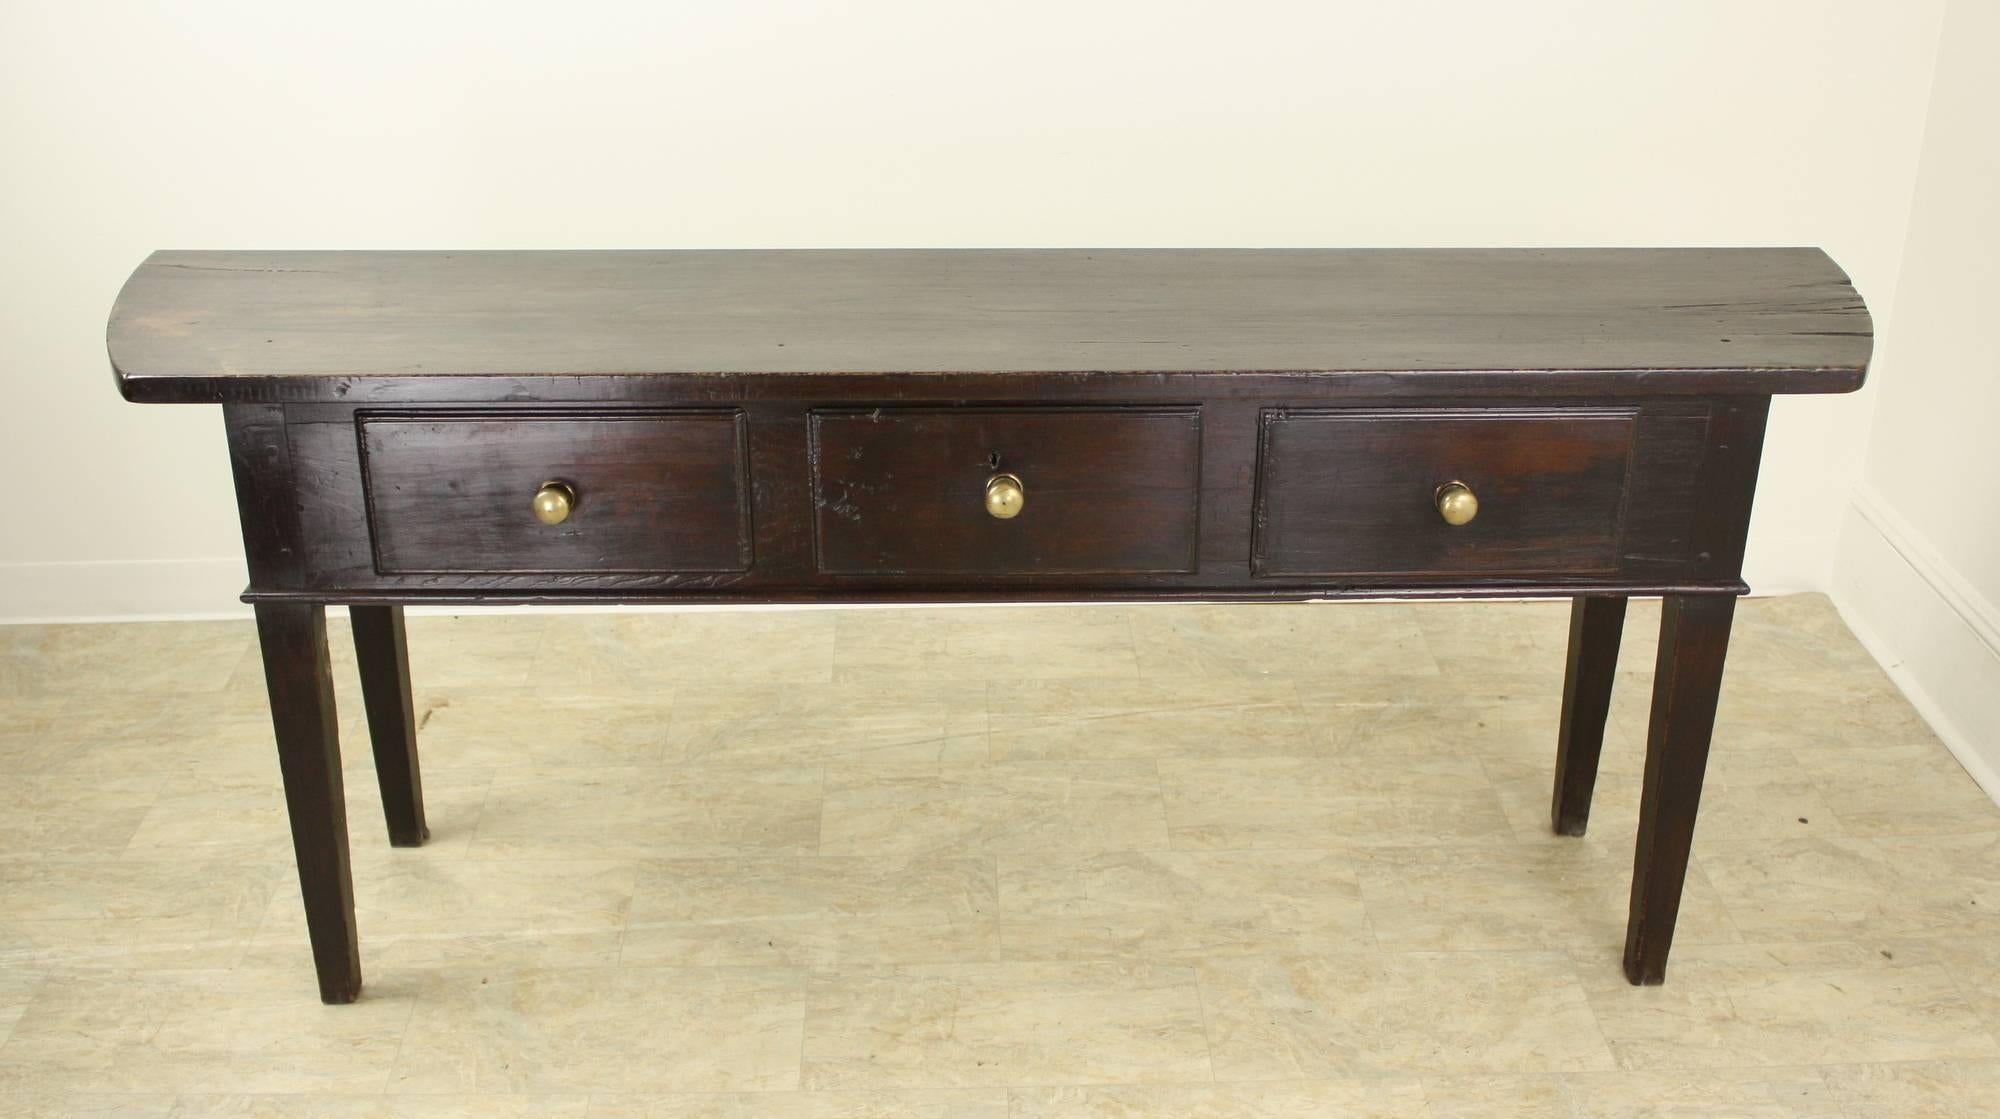 This long and elegant console table, in dark, rich fruitwood, is dramatic and impressive. The ends on each side of the top are shaped much like a D-end table, which is quite unusual and eye-catching. The top's fruitwood grain is most attractive